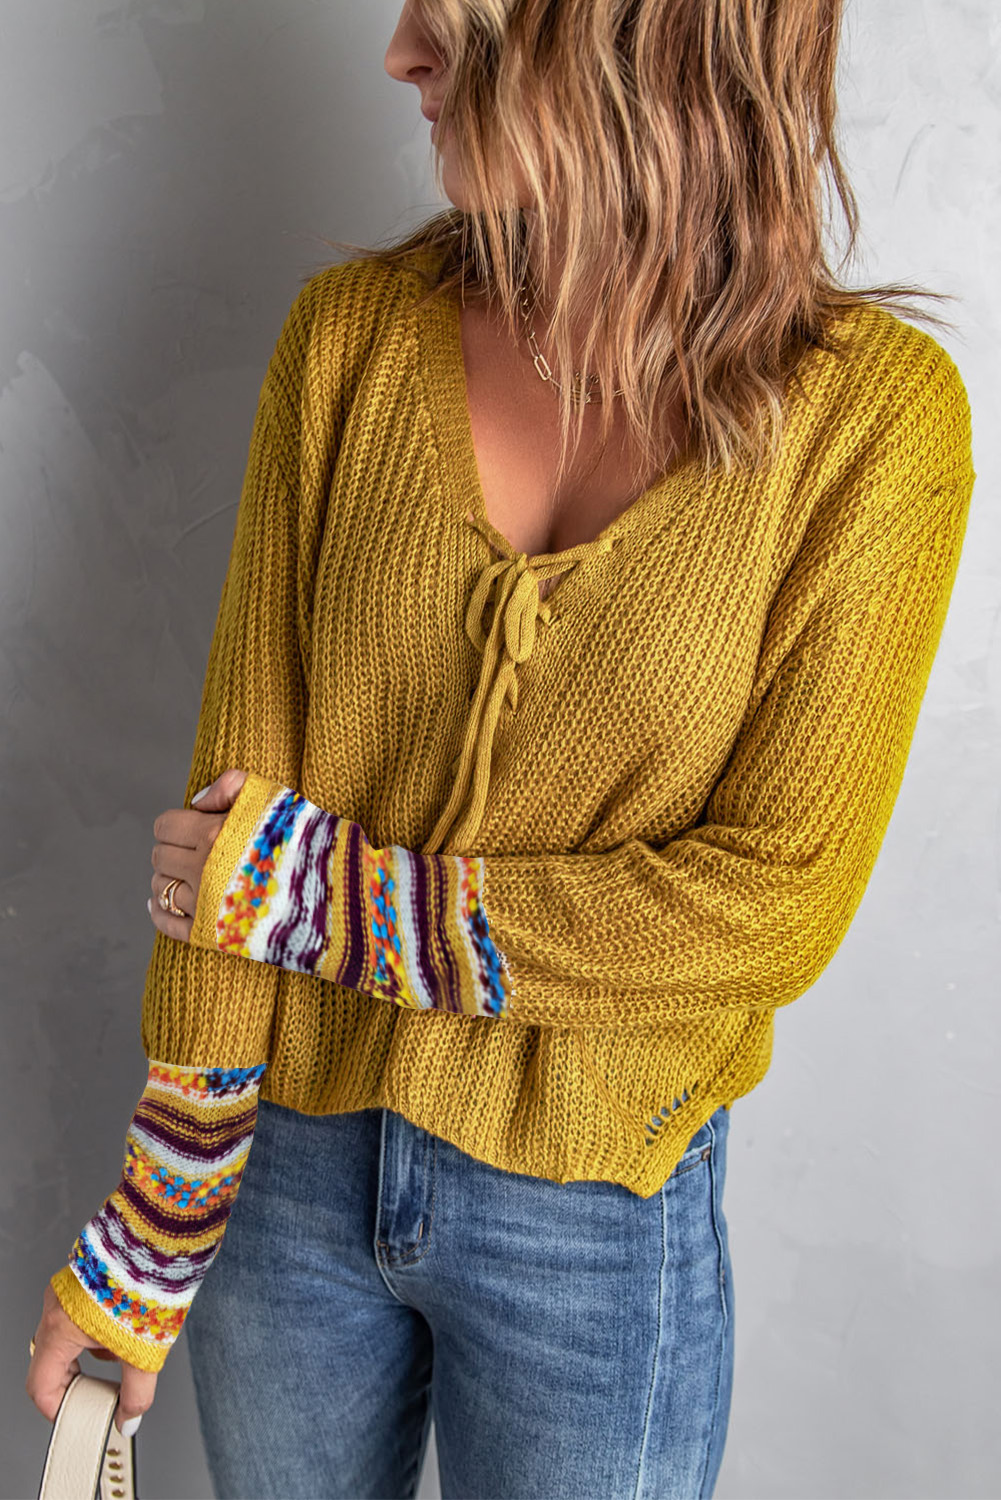 Yellow Lace Up V Neck Knit Sweater - Passion of Essence Boutique